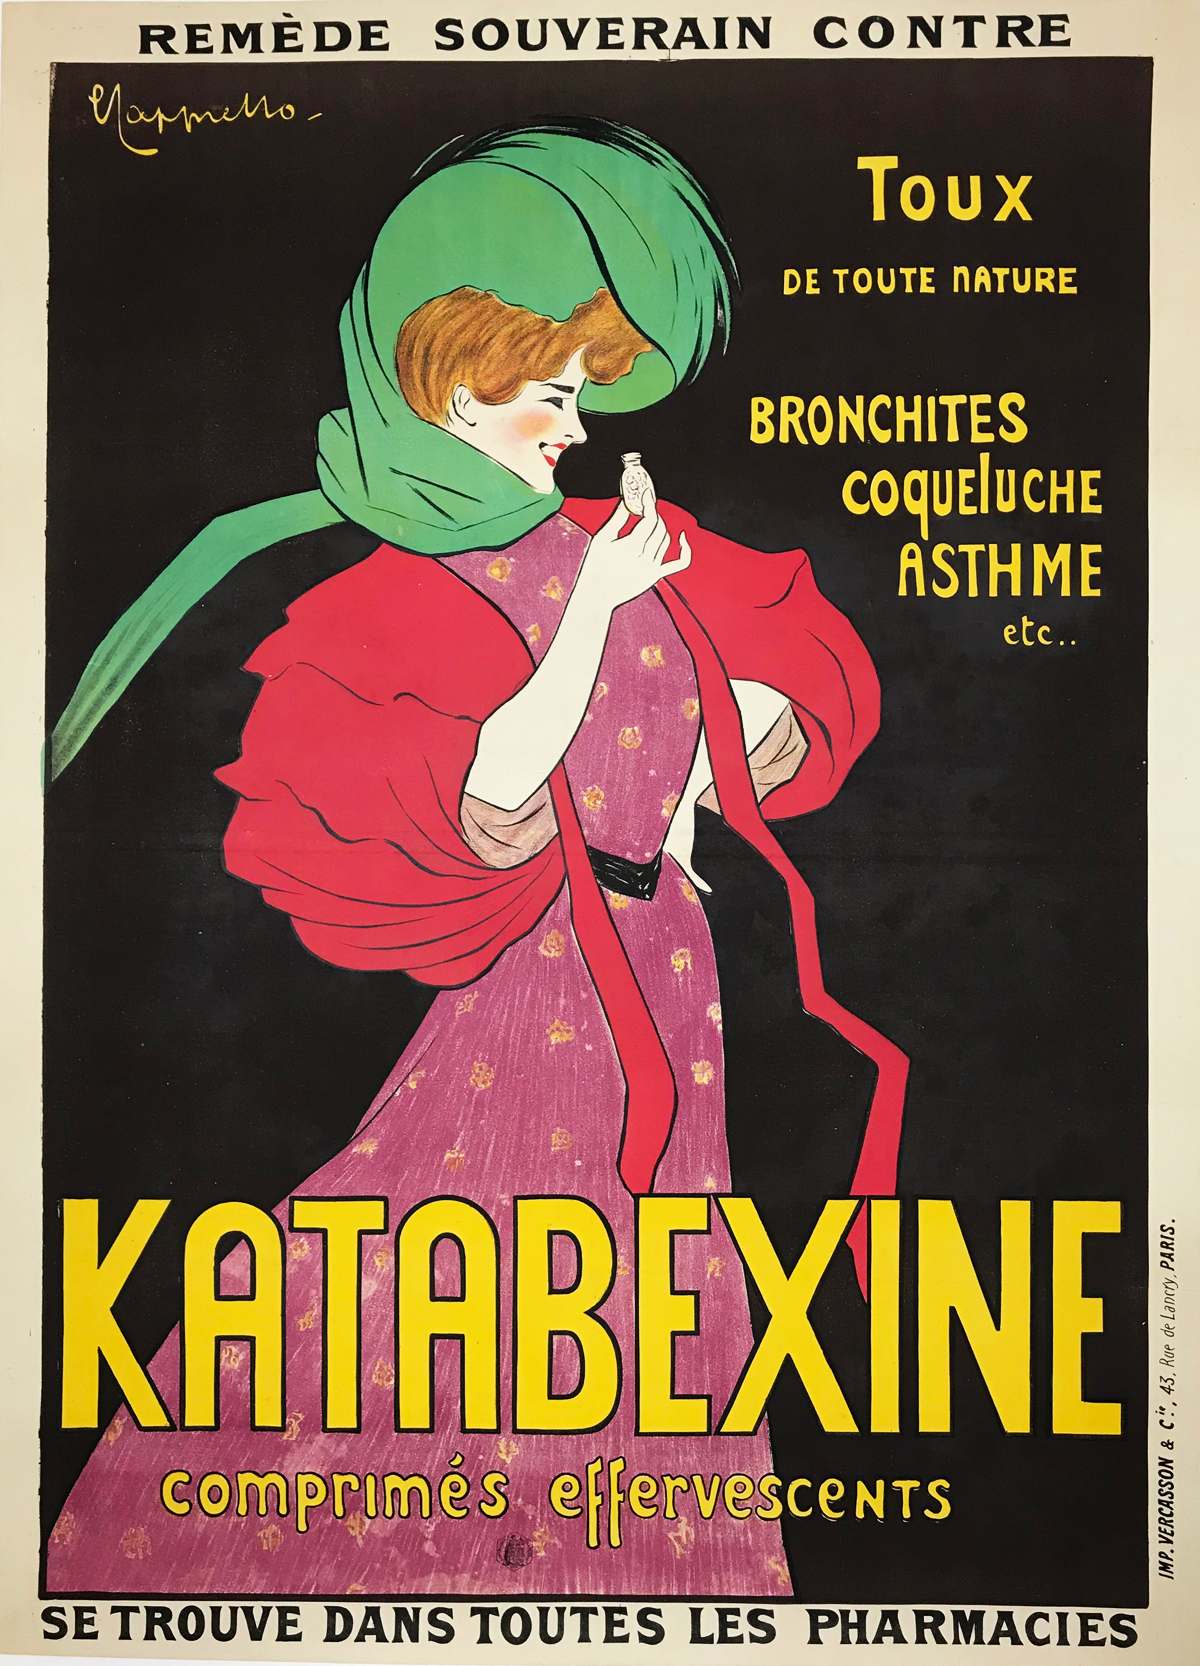 Katabexine original vintage poster by Leonetto Cappiello from 1903. French poster advertising cough medicine, shows a women in a pink and red dress with a green scarf and she is holding a medicine bottle.